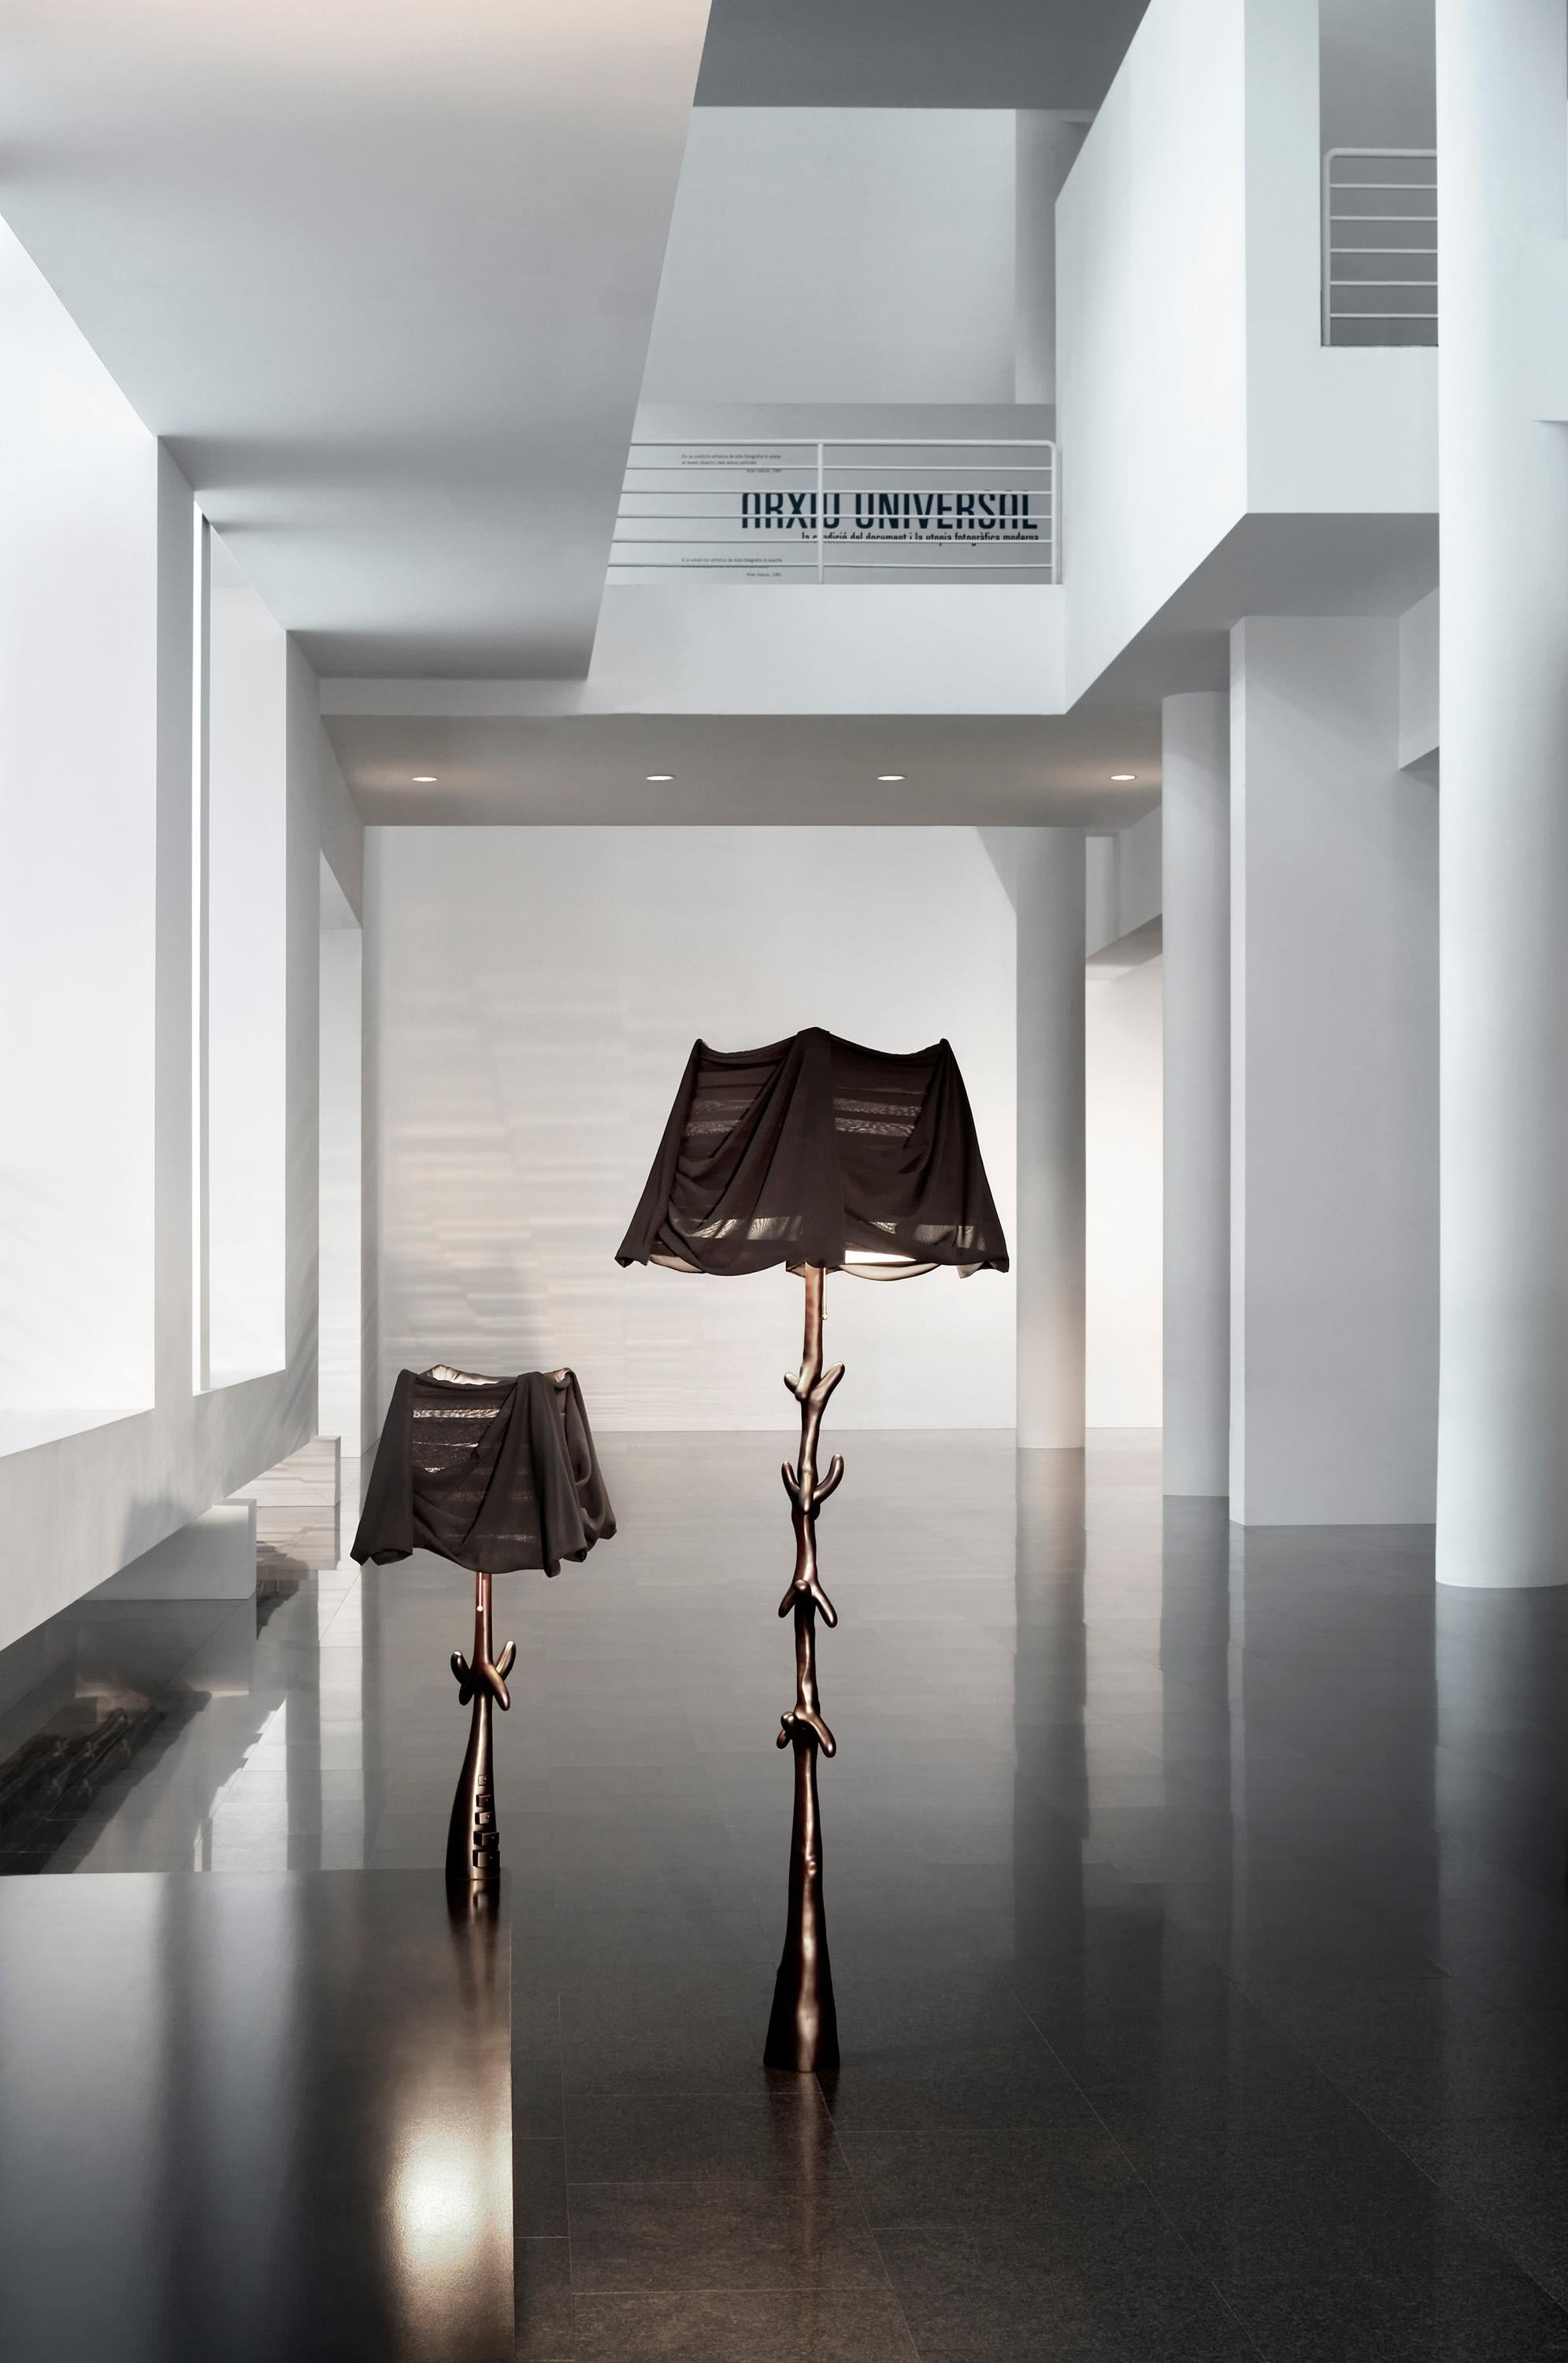 The Muletas Lamp explores Dalí’s obsession with the uncanny, surprising and novel.

Drawn by Dalí for Jean Michel Frank, Oscar Tusquets and Robert Descharnes brought the design to life. It branches upwards with a set of linking crutches bound like